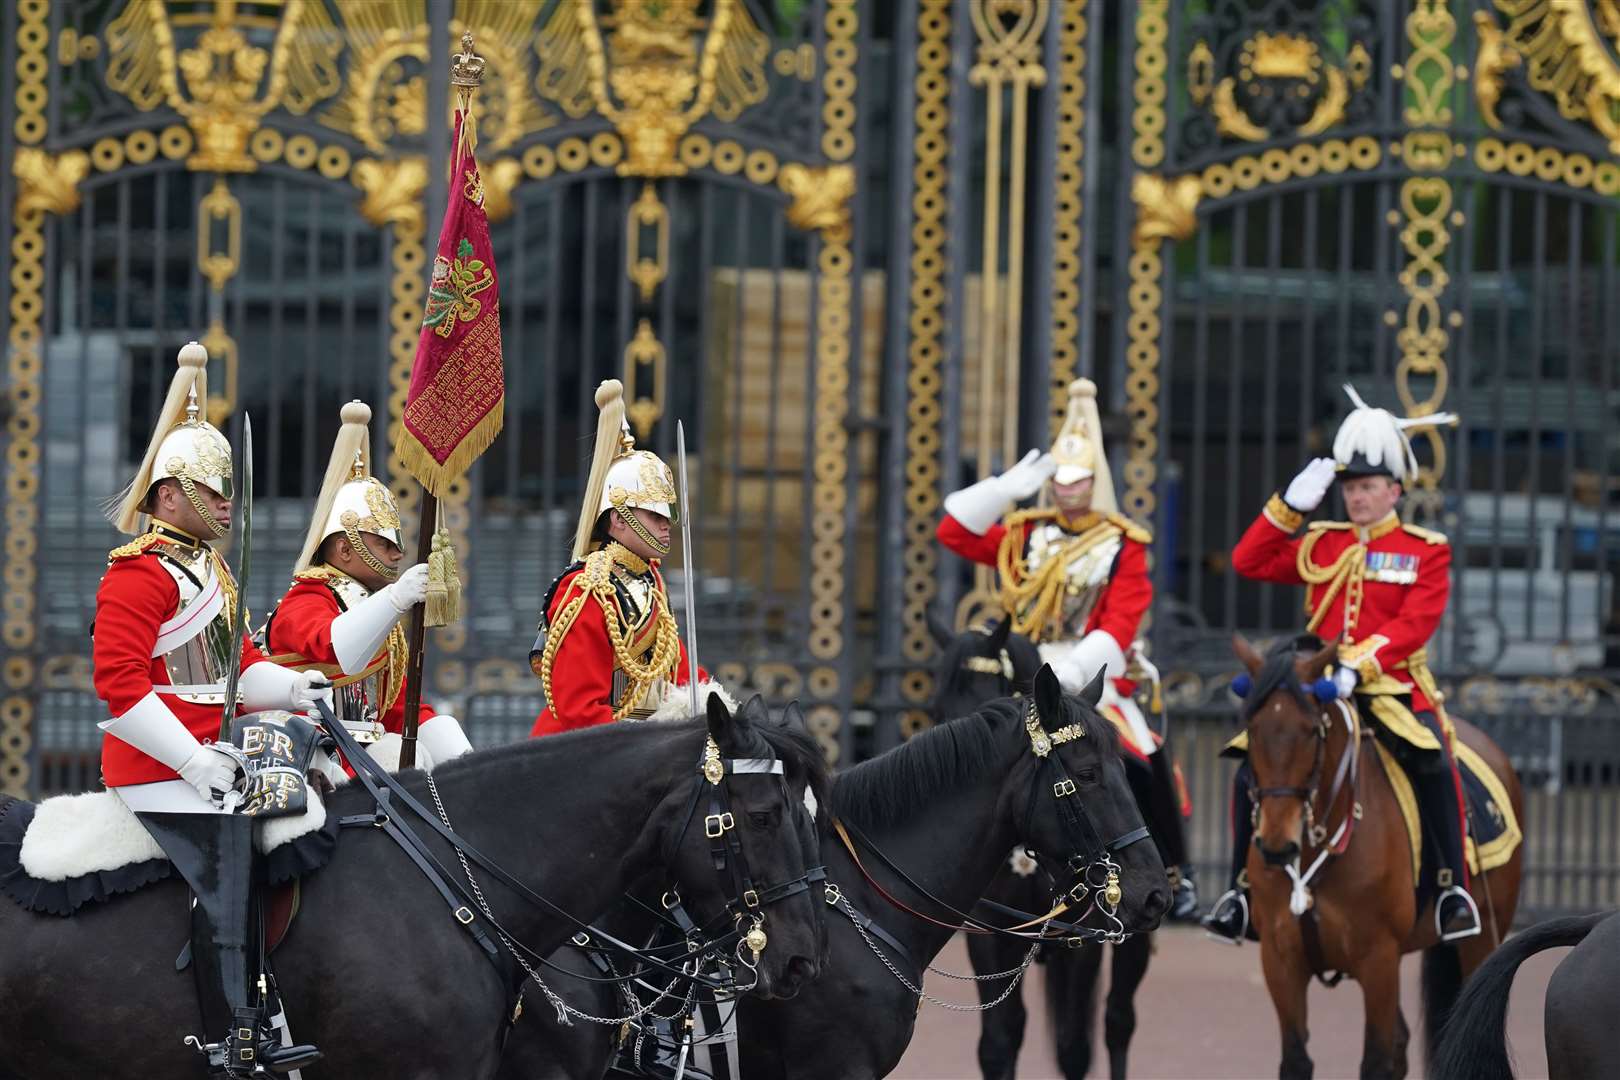 Lifeguards from the Household Cavalry outside Buckingham Palace ahead of the State Opening of Parliament (Steve Parsons/PA)